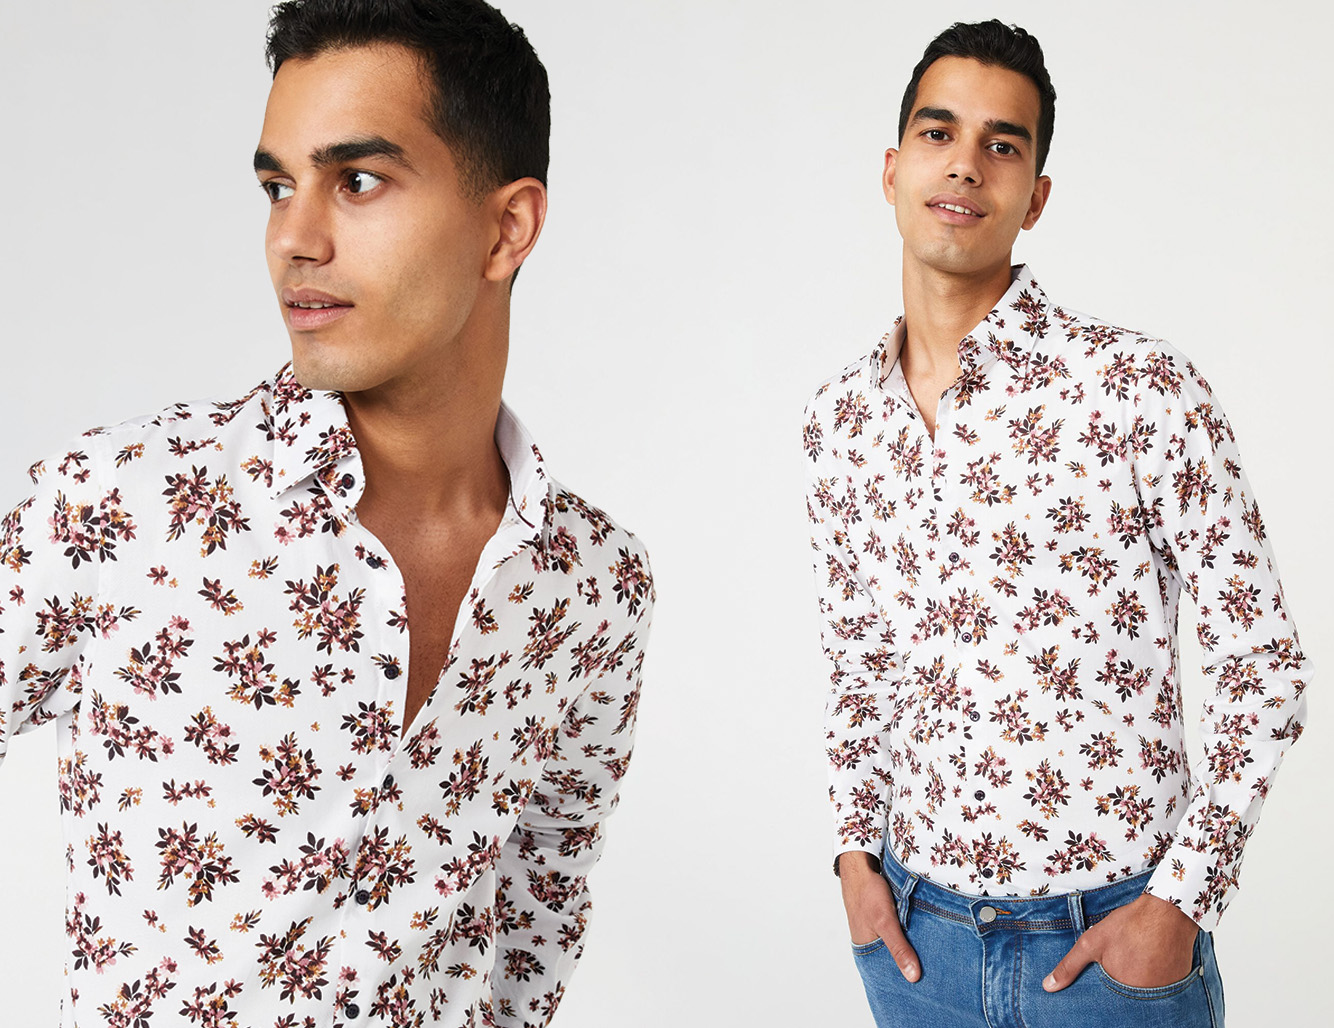 Model wearing button up shirt with floral prints